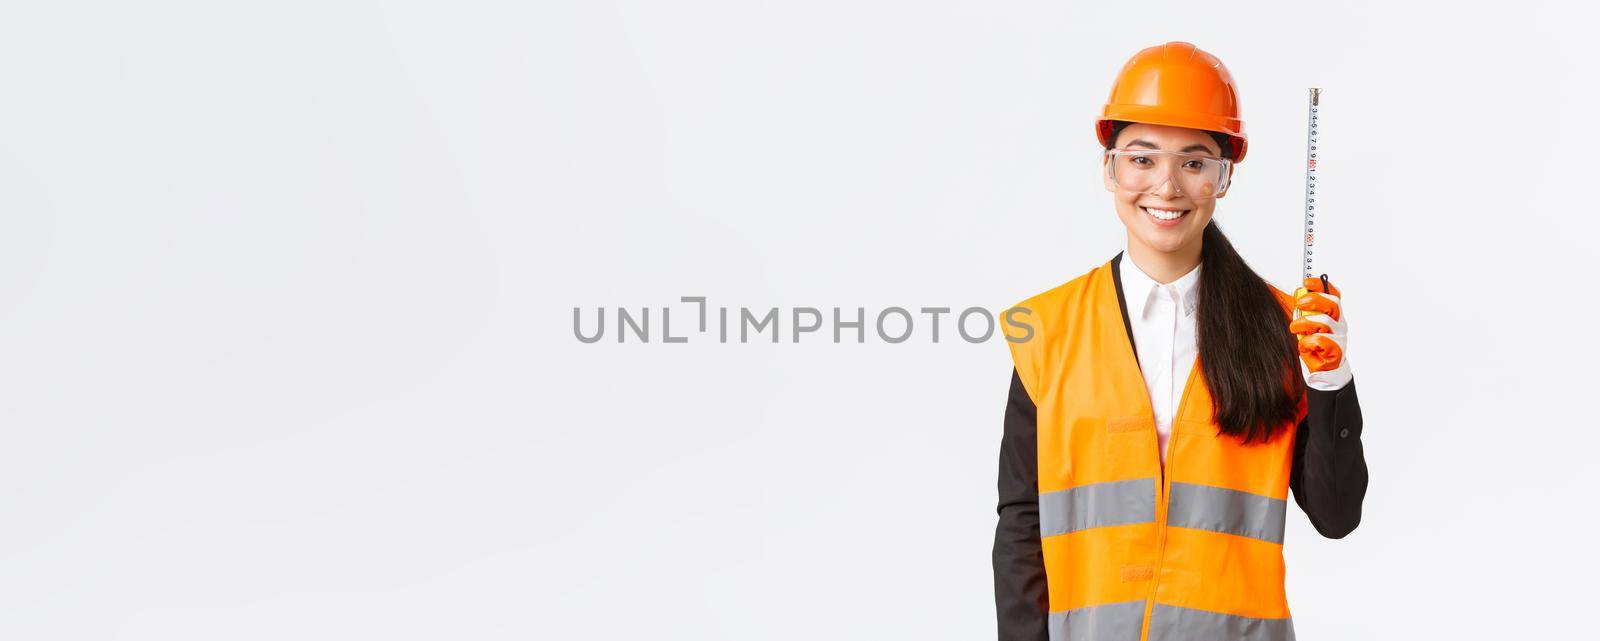 Confident smiling, professional asian female engineer, construction technician in safety helmet and reflective uniform, standing with tape measure, measuring layout at building area.